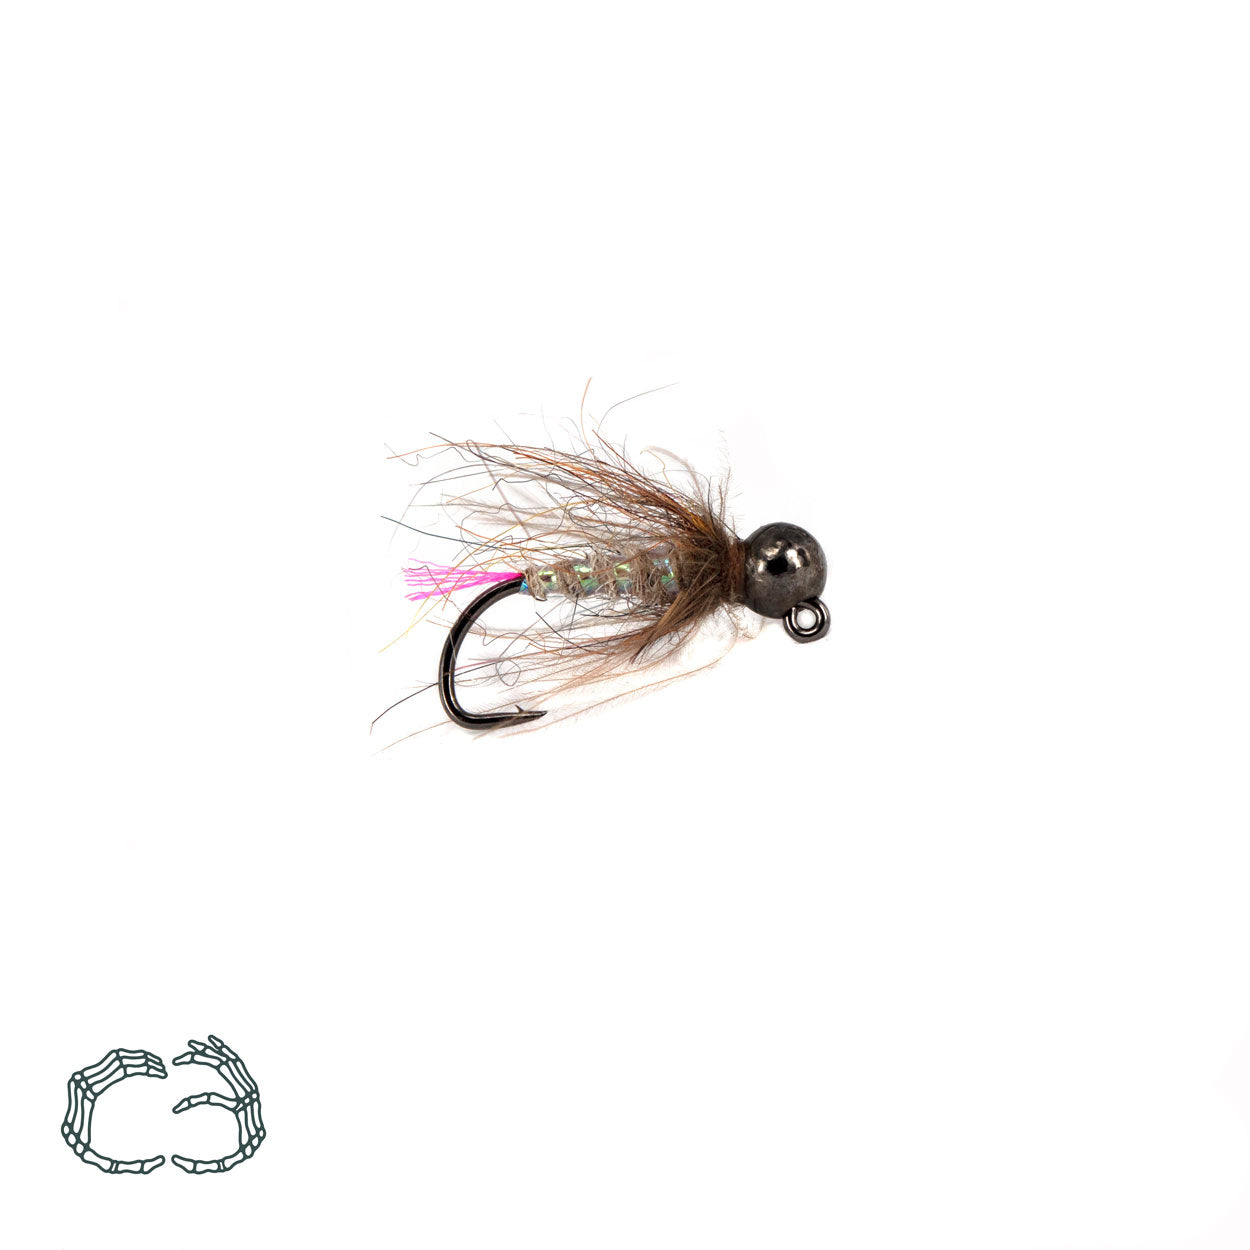 Black Tungsten Bead Tactical Hares Ear Czech Nymph Euro Nymphing Fly 